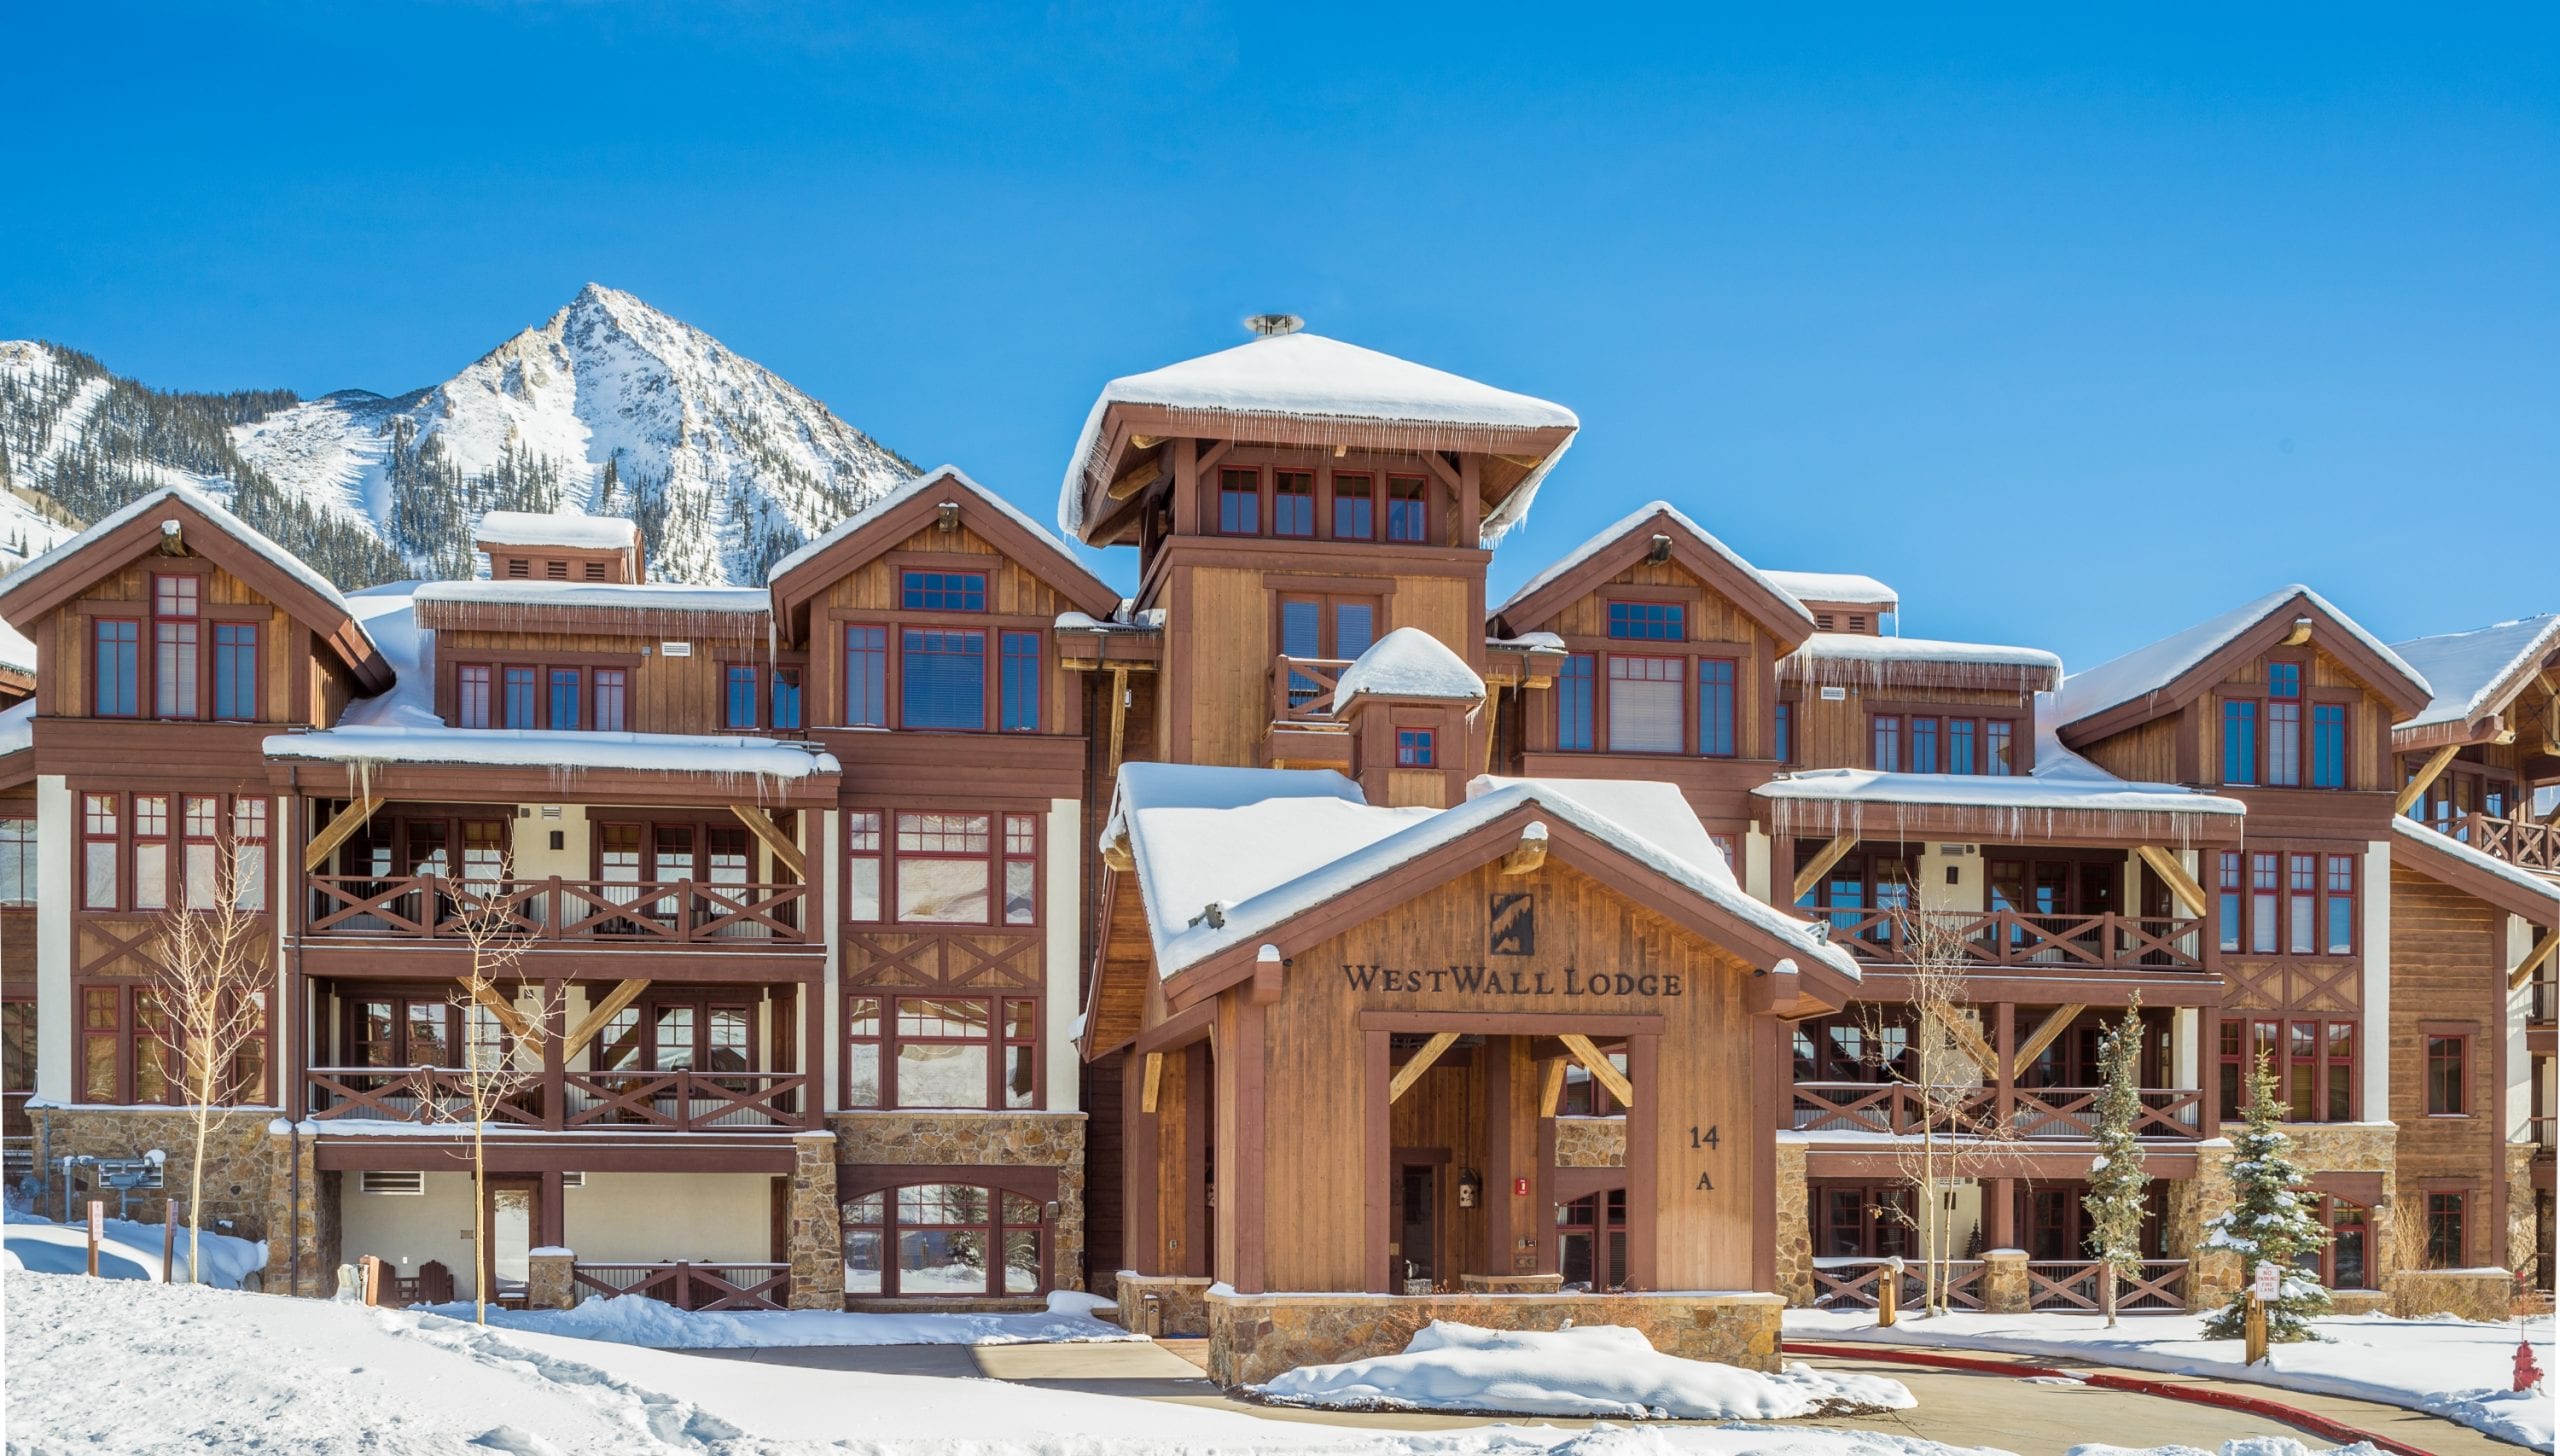 WestWall Lodge exterior in winter with the peak of Mt Crested Butte in the background